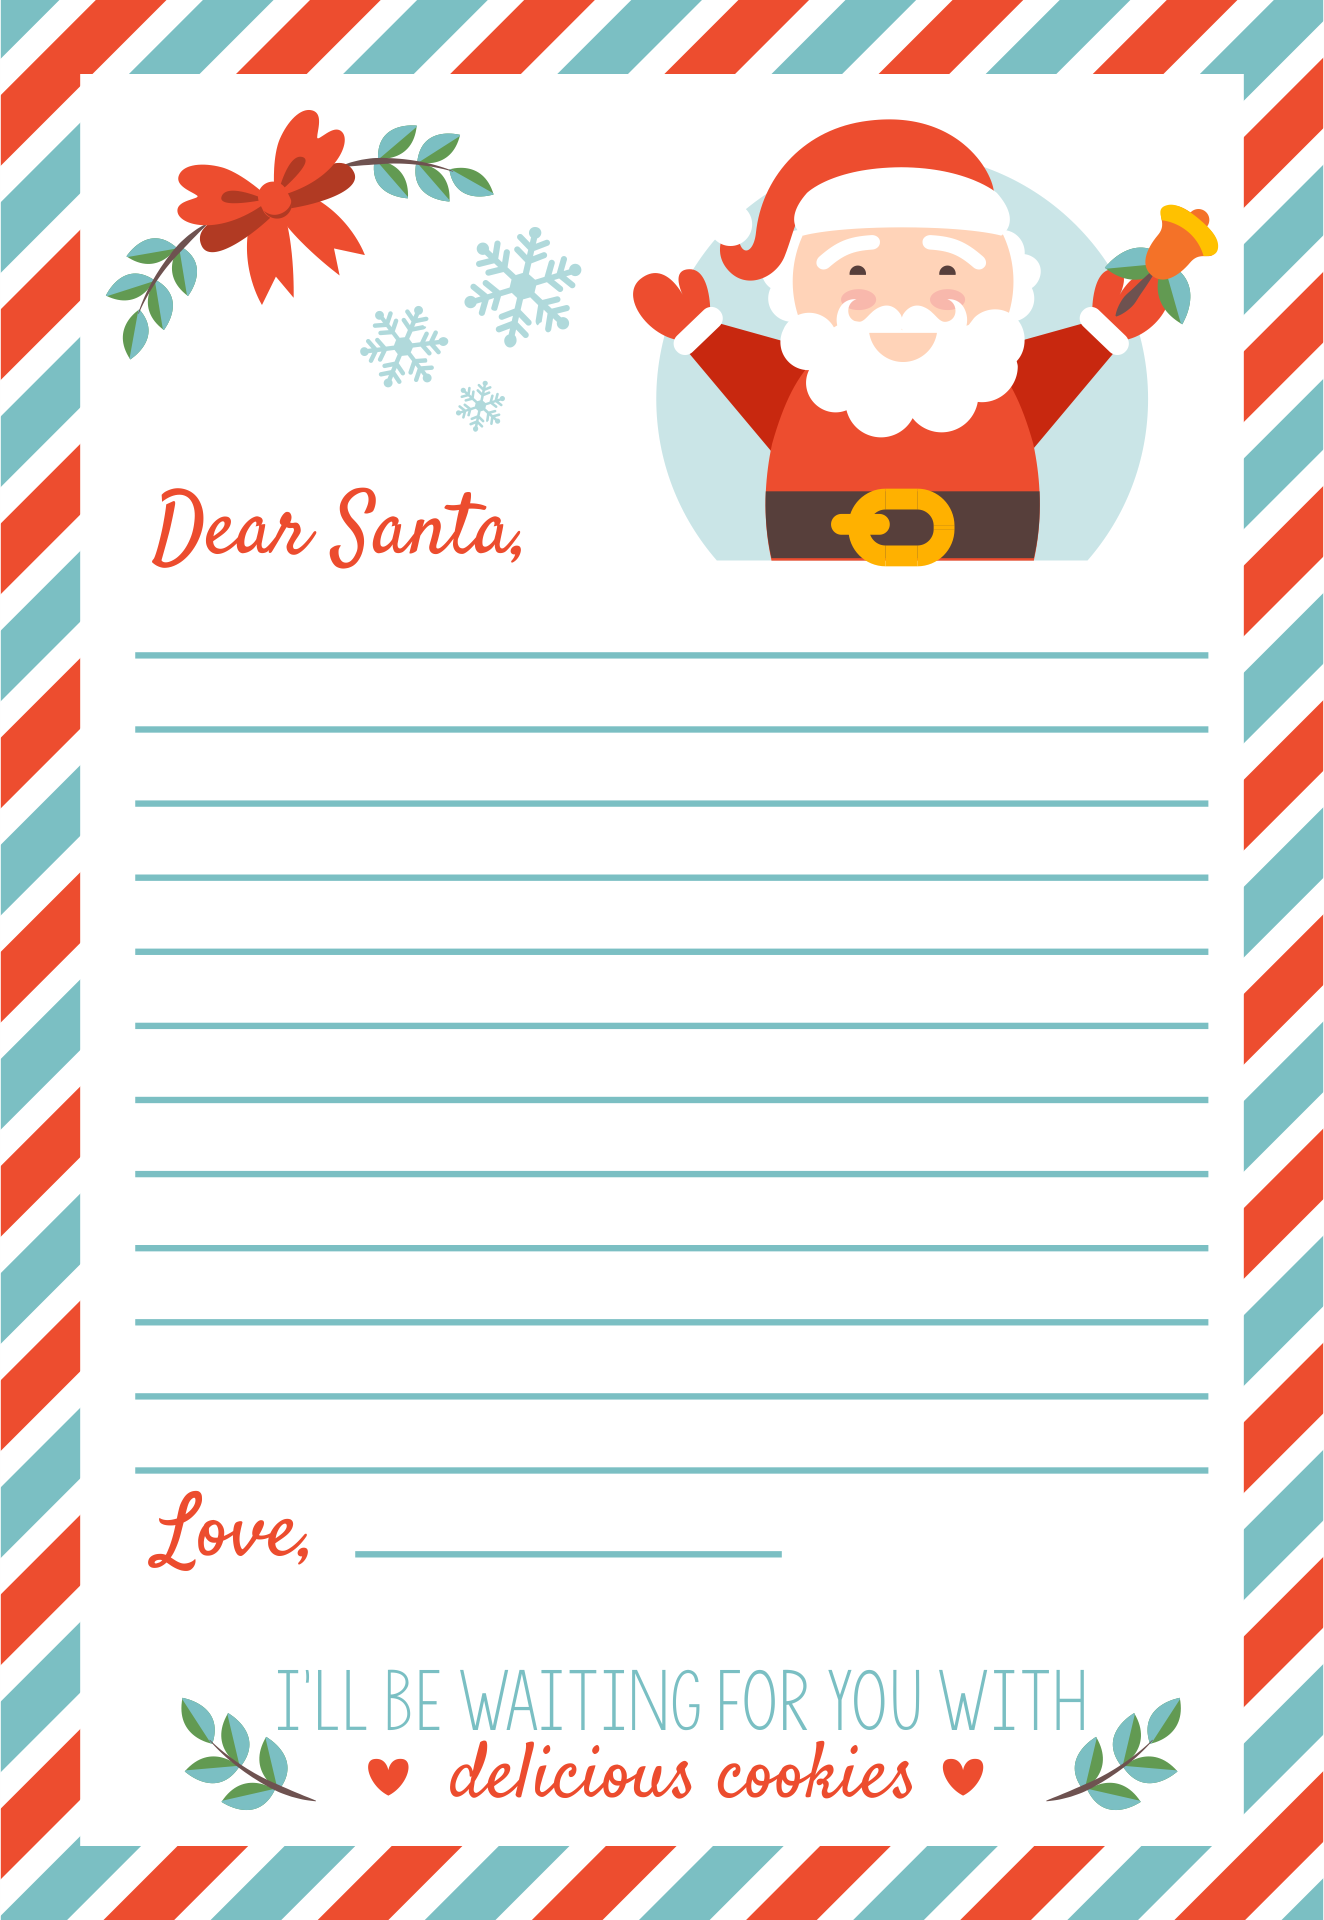 santa-response-letter-template-collection-letter-template-collection